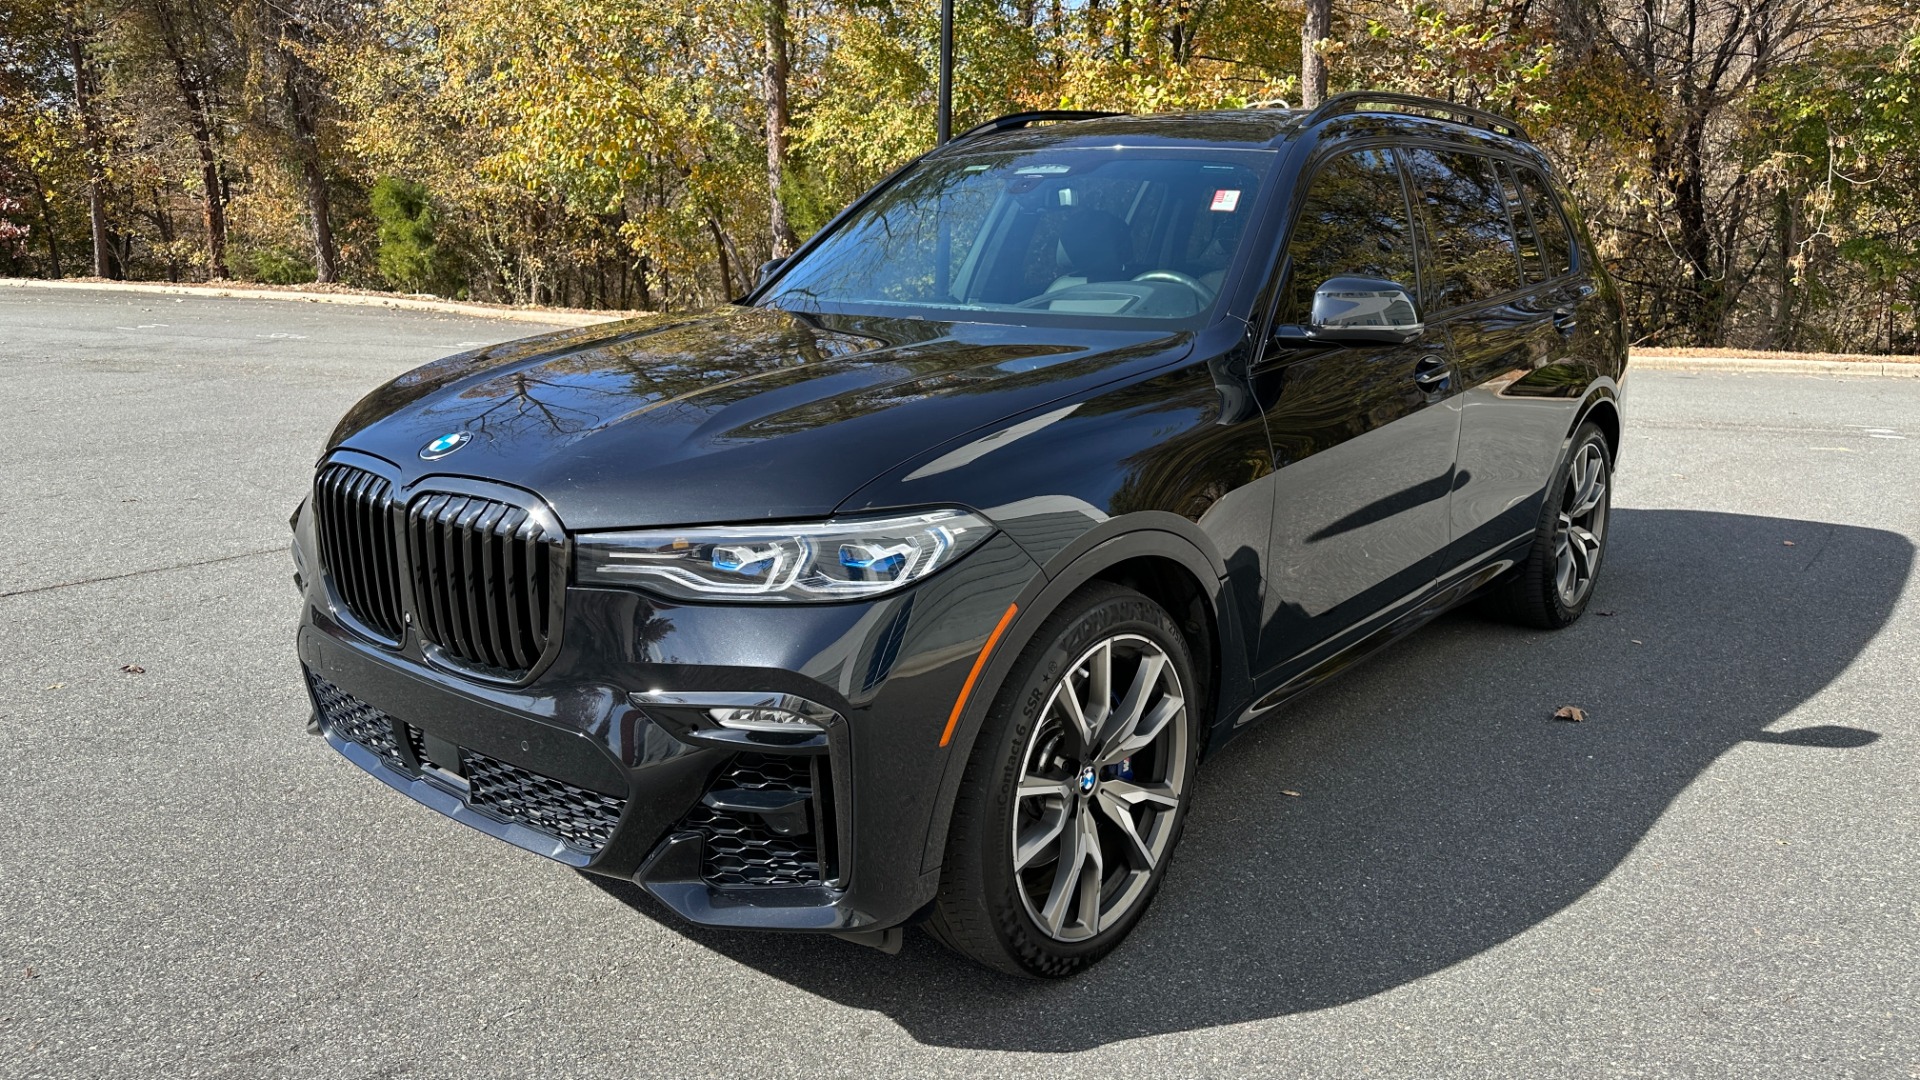 Used 2020 BMW X7 M50i / LOADED / DYNAMIC HANDLING PKG / EXECUTIVE / LUXURY SEATING PKG / MOR for sale $57,995 at Formula Imports in Charlotte NC 28227 7